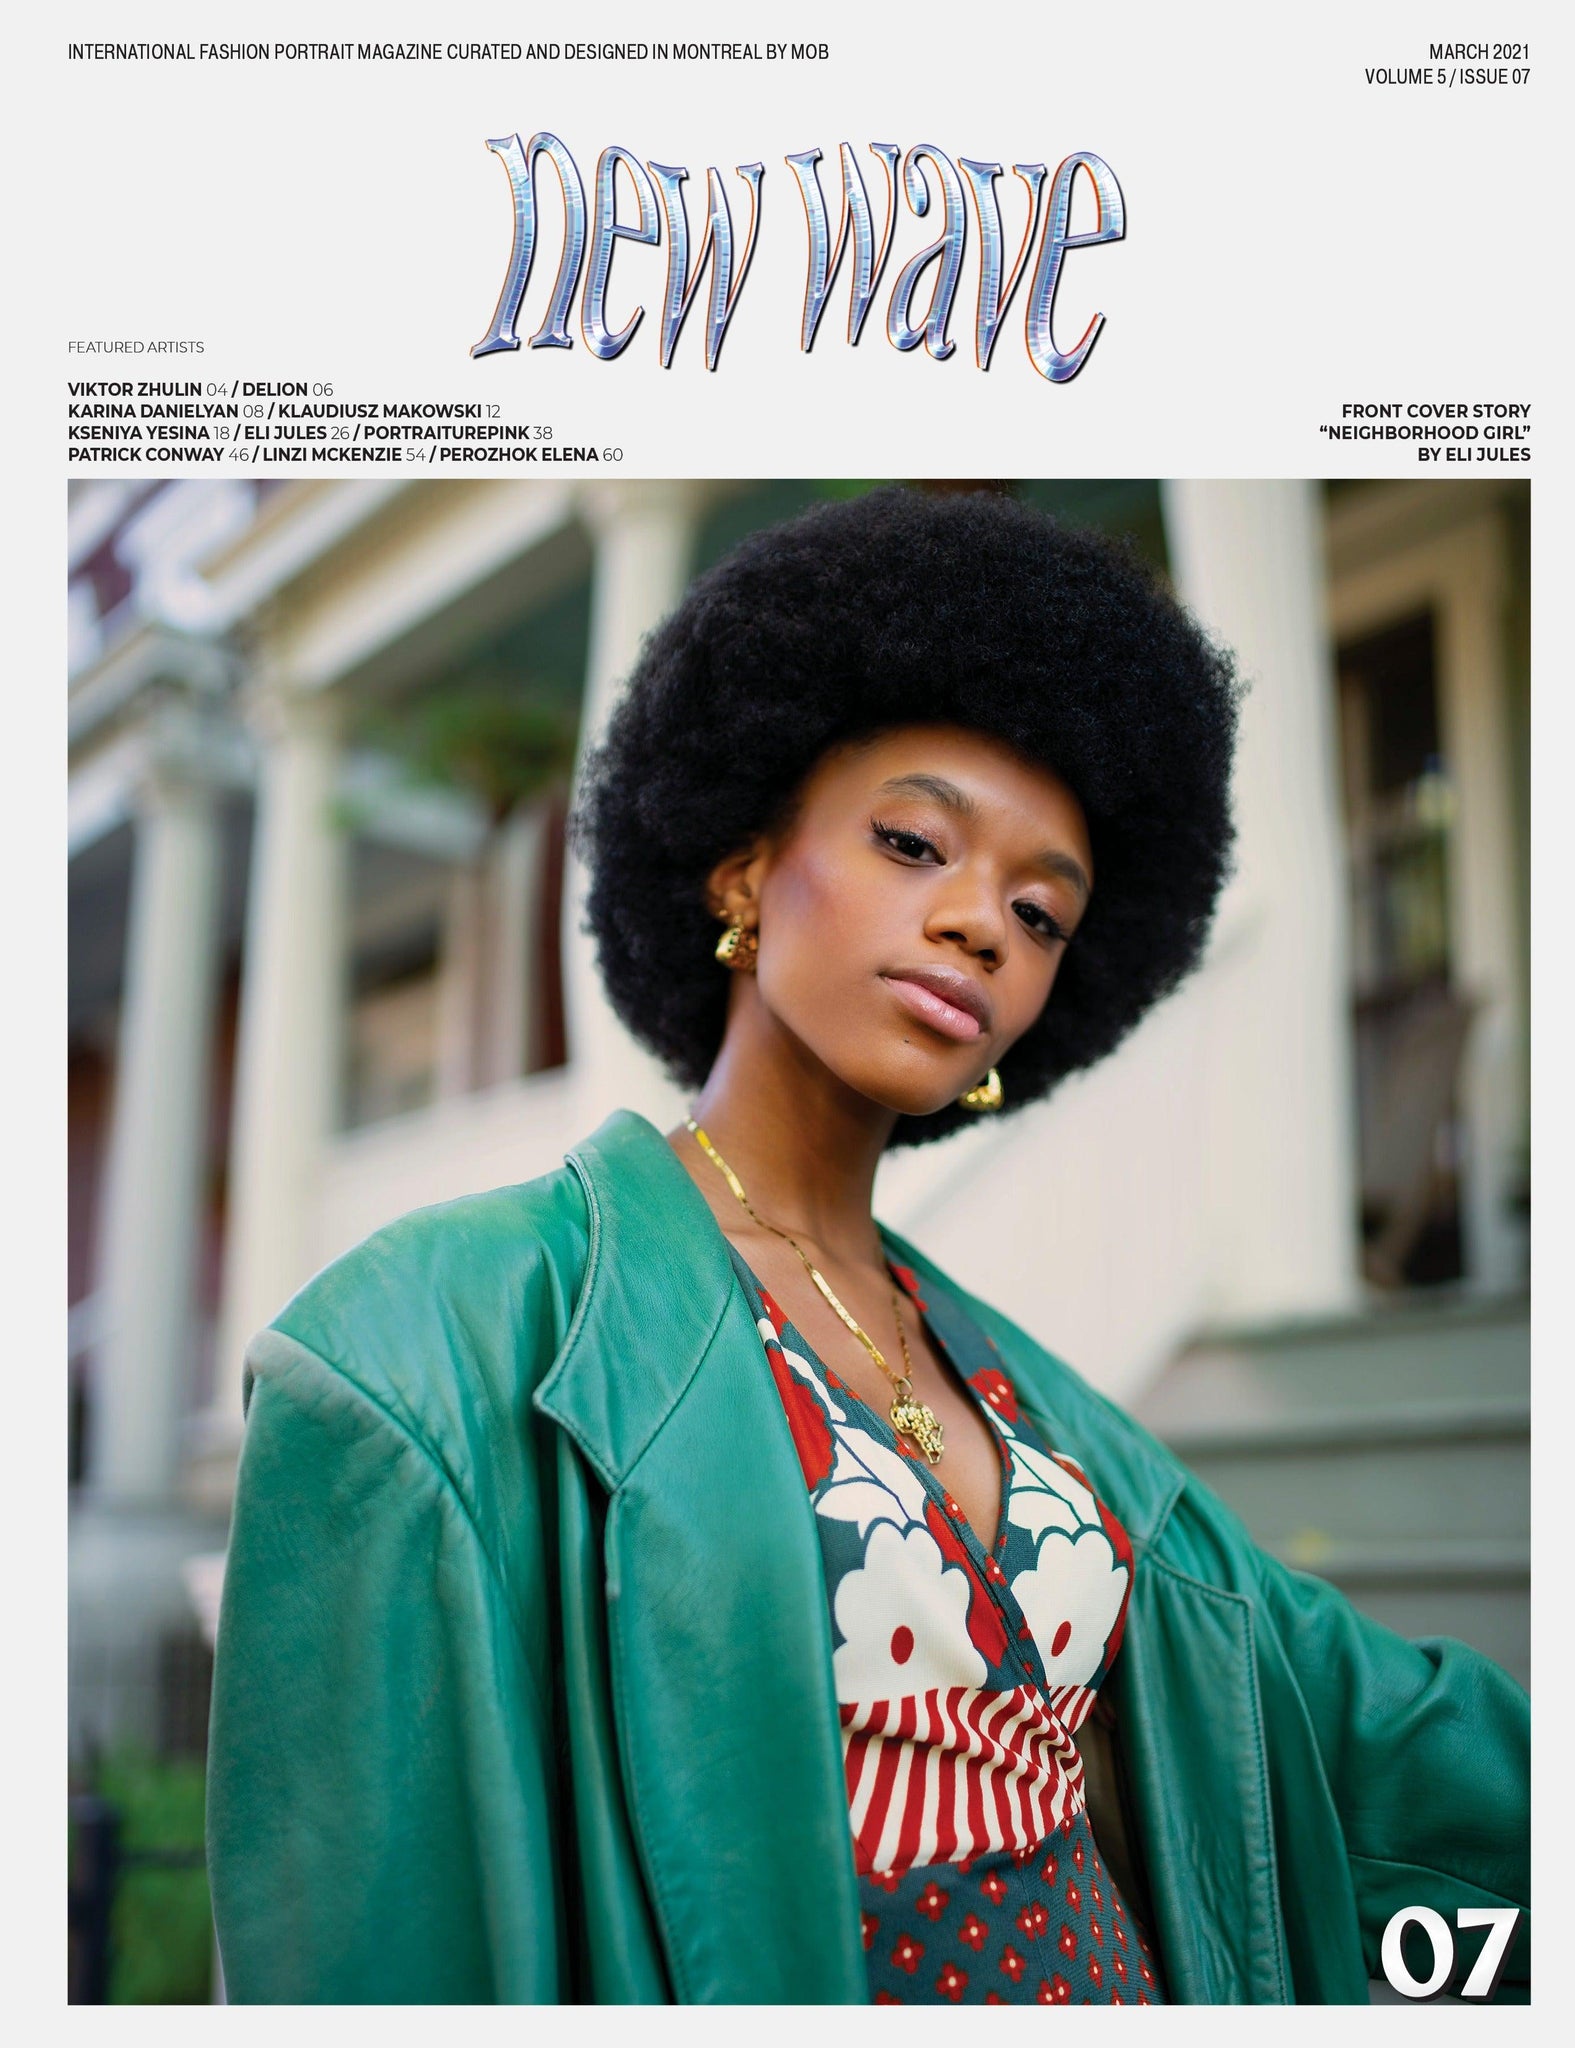 NEW WAVE | VOLUME FIVE | ISSUE #07 - Mob Journal